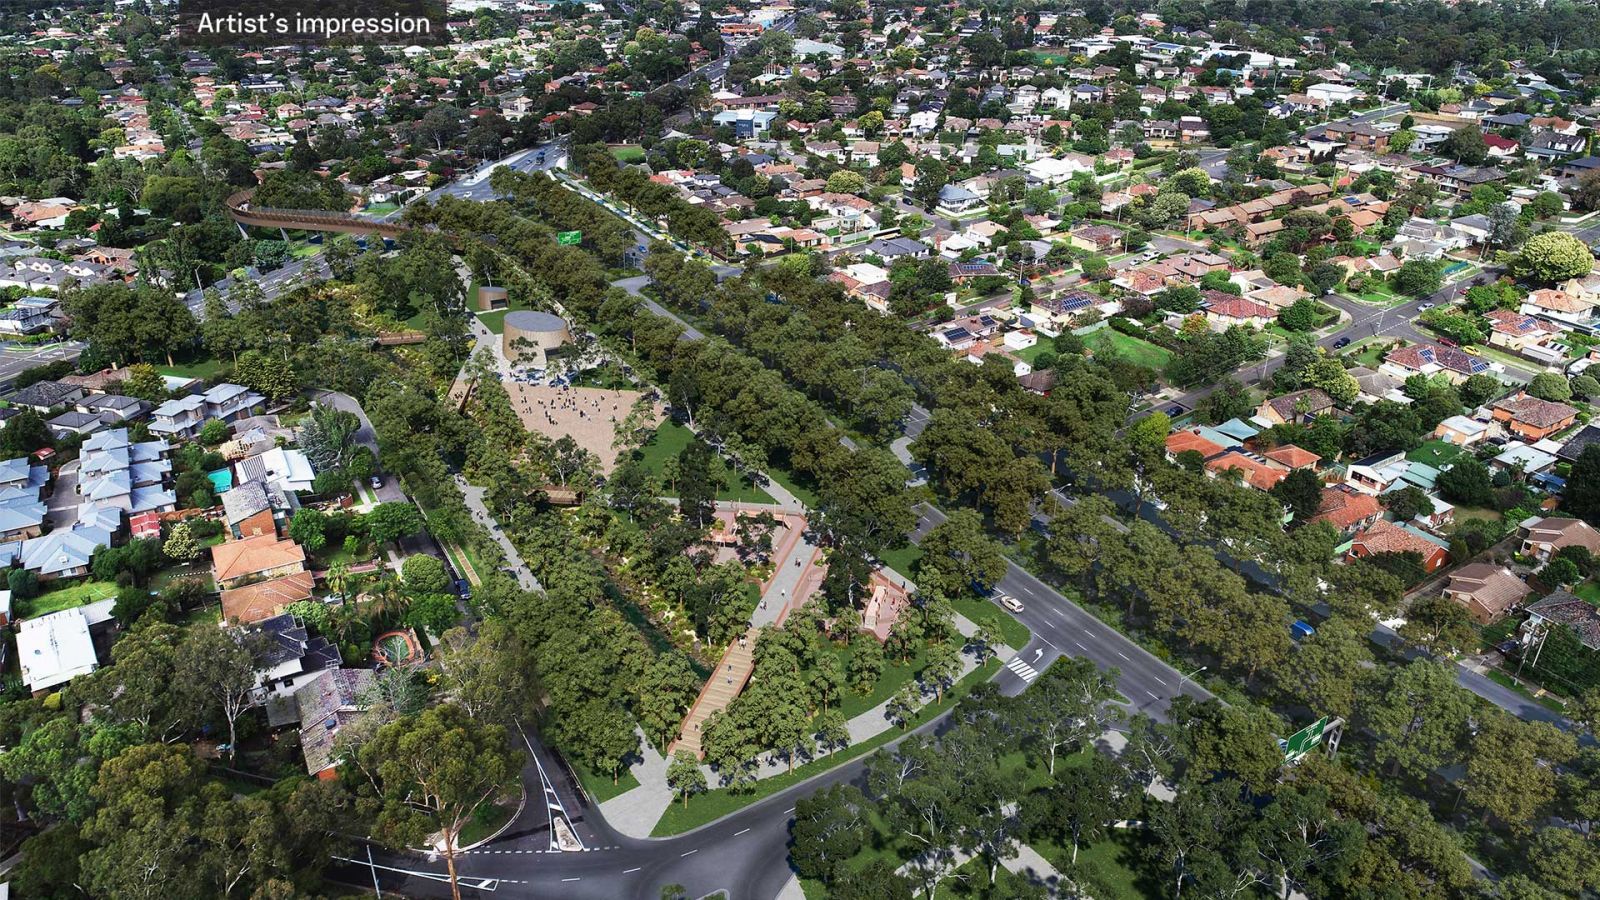 Artist’s impression aerial view looking south of Borlase Reserve parklands with new playground, bridge over Lower Plenty Road to Banyule Flats and Greensborough Road boulevard, Yallambie.